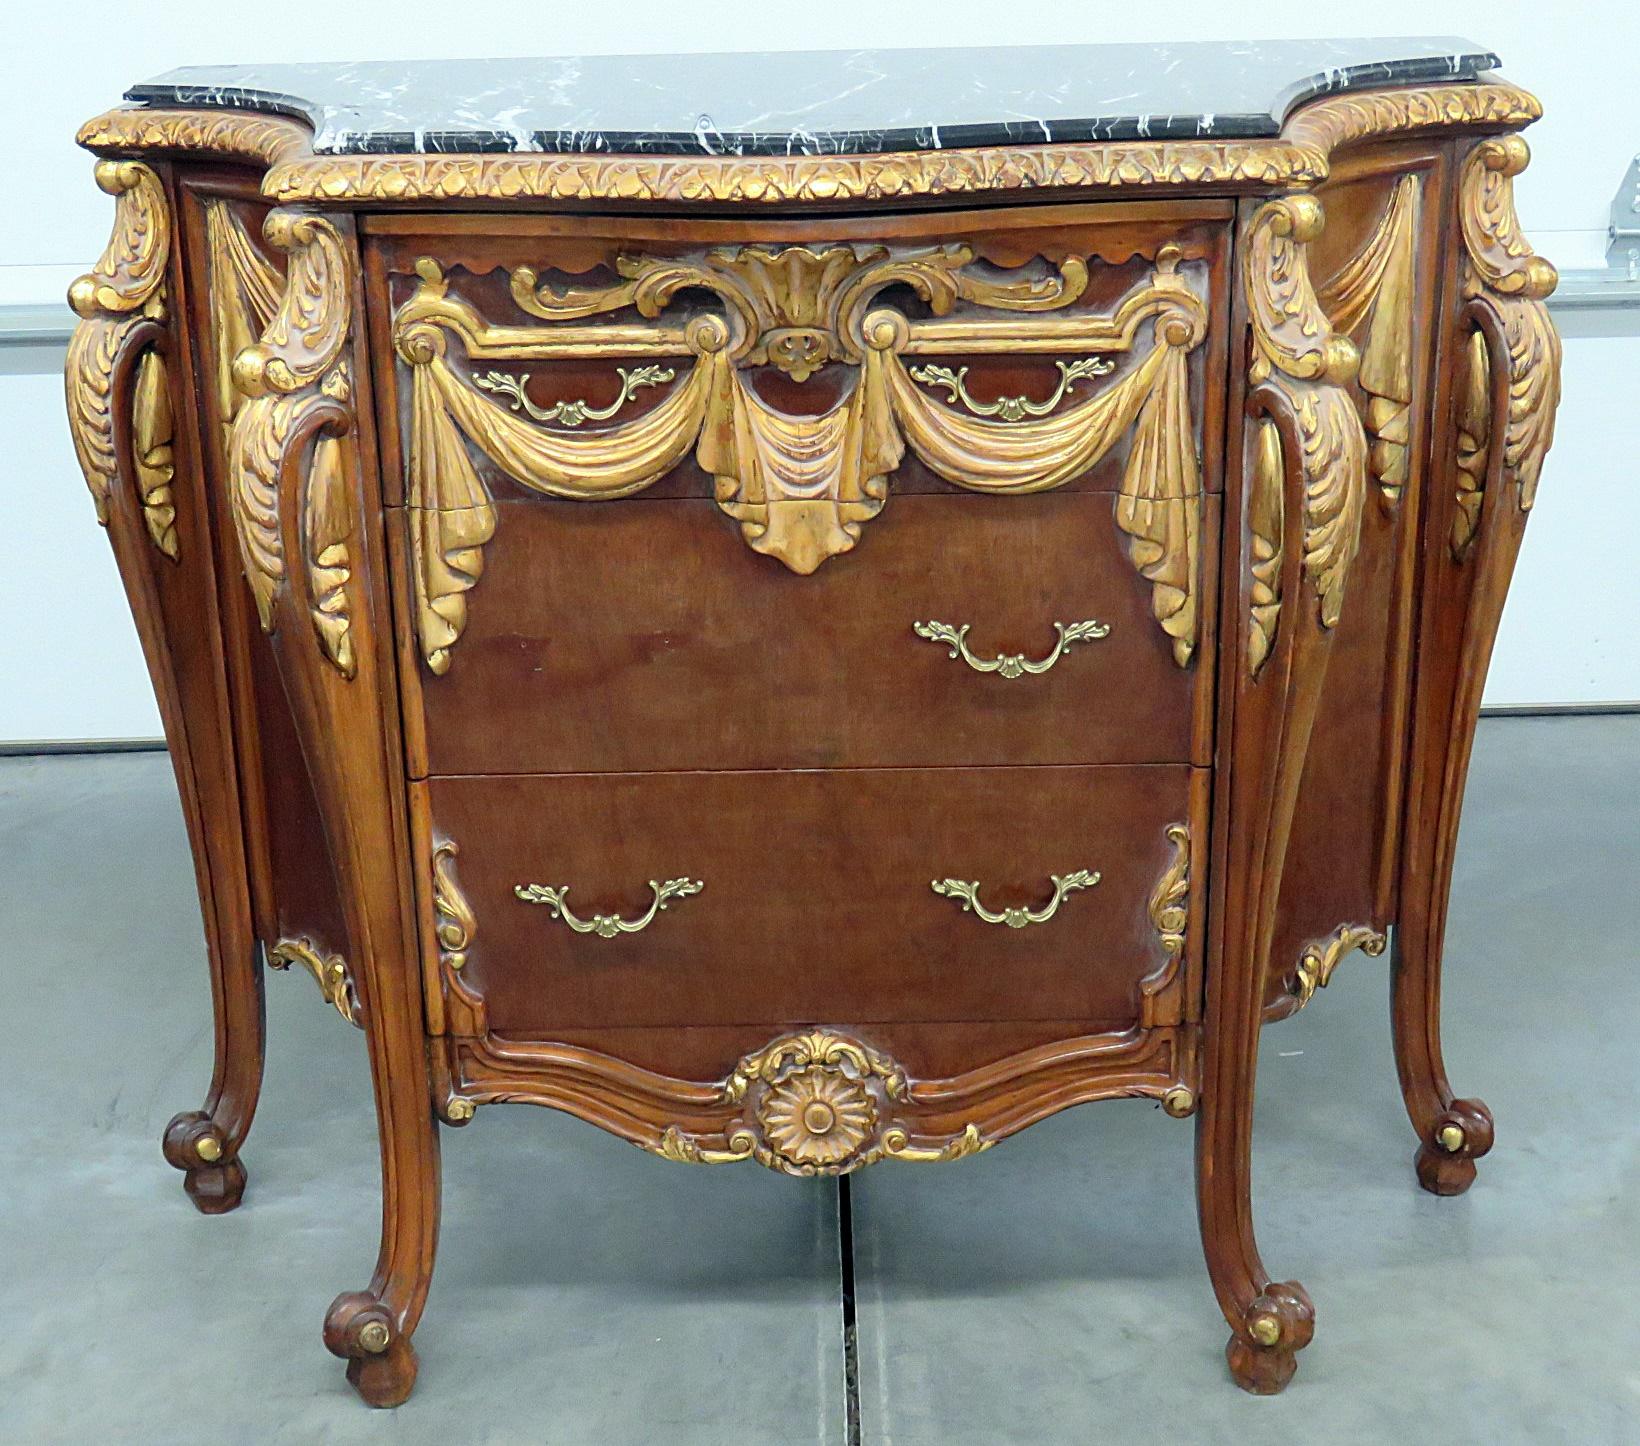 Empire style marble top 2-drawer commode with gilt accents.